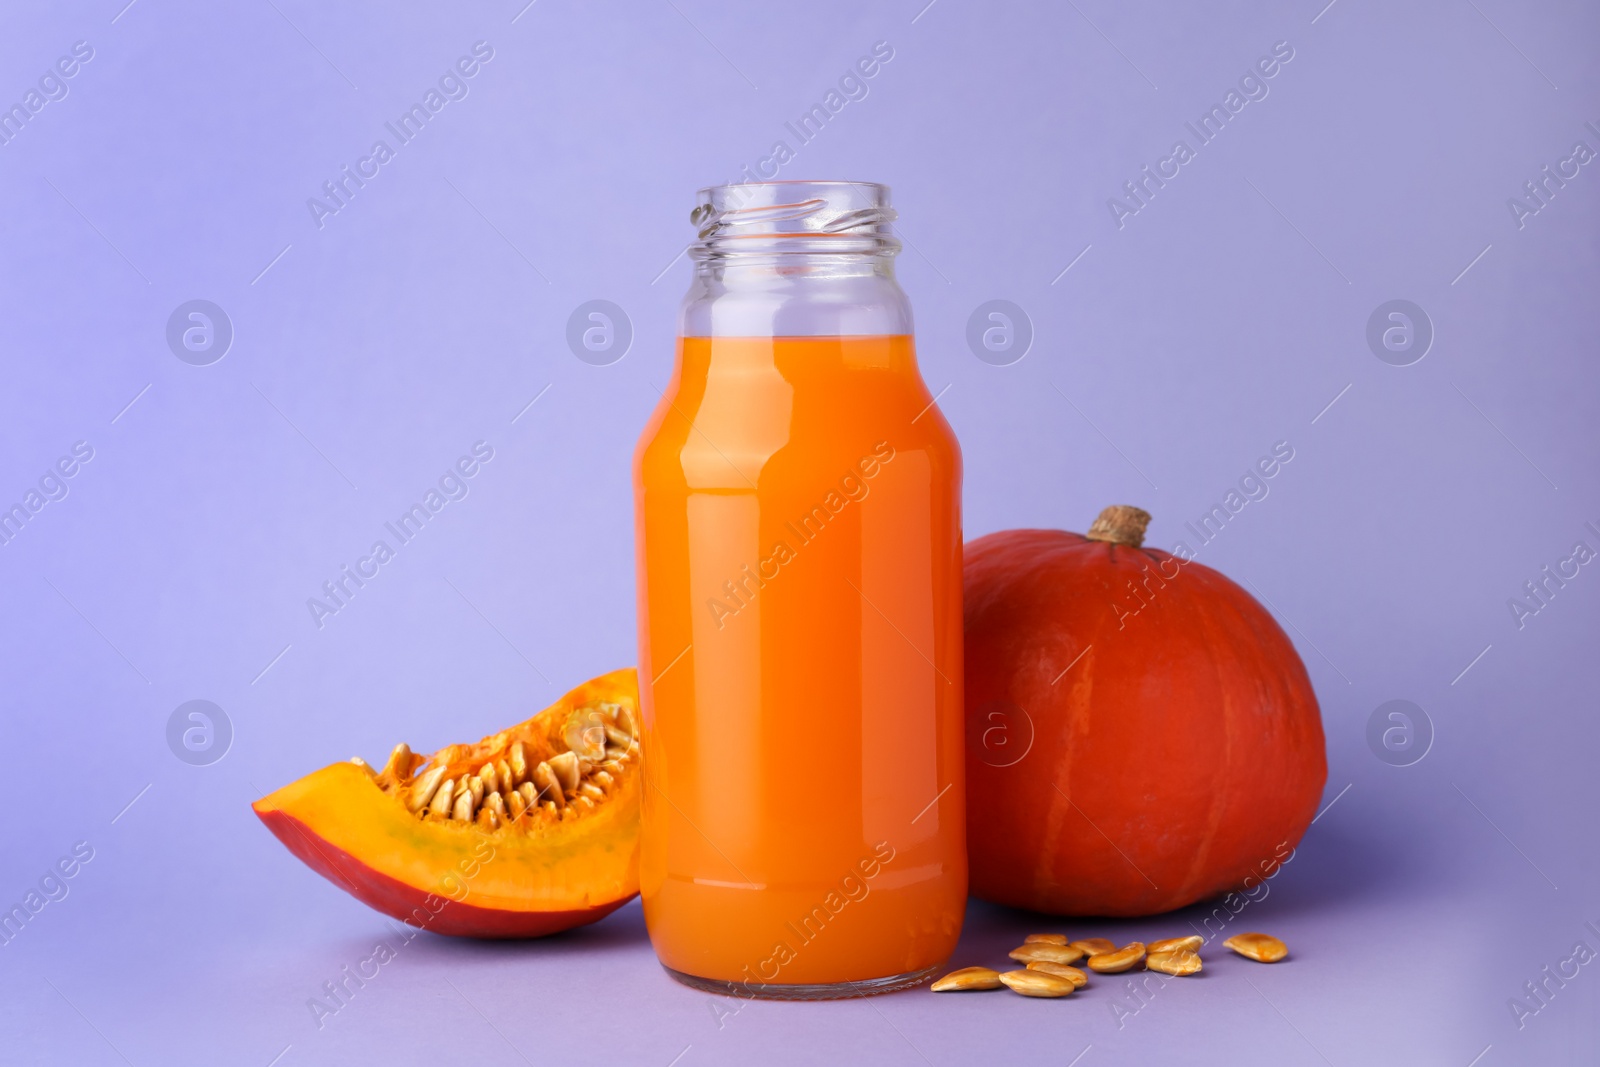 Photo of Tasty pumpkin juice in glass bottle, whole and cut pumpkins on lavender color background